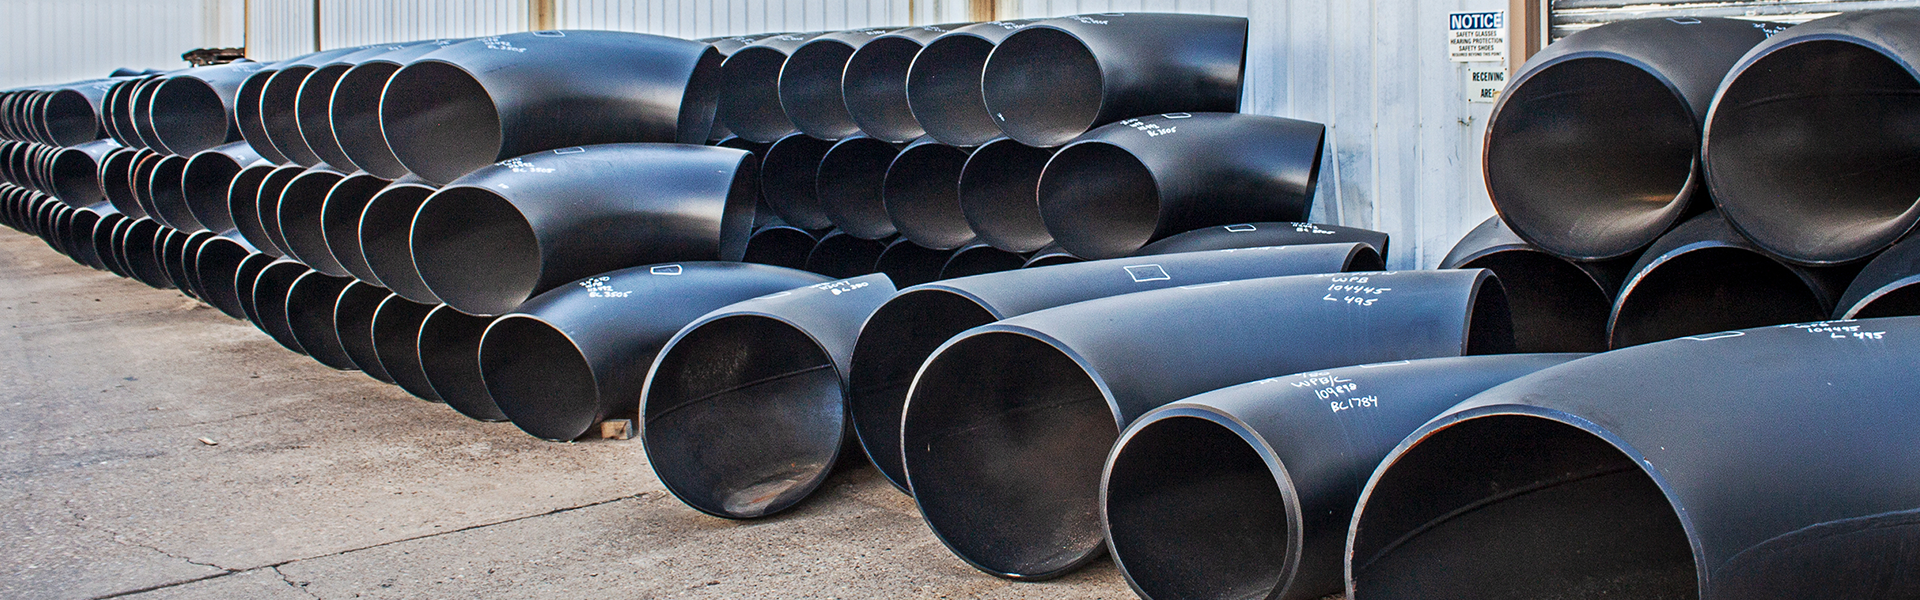 Large carbon steel fittings arranged in stacks outside a warehouse.